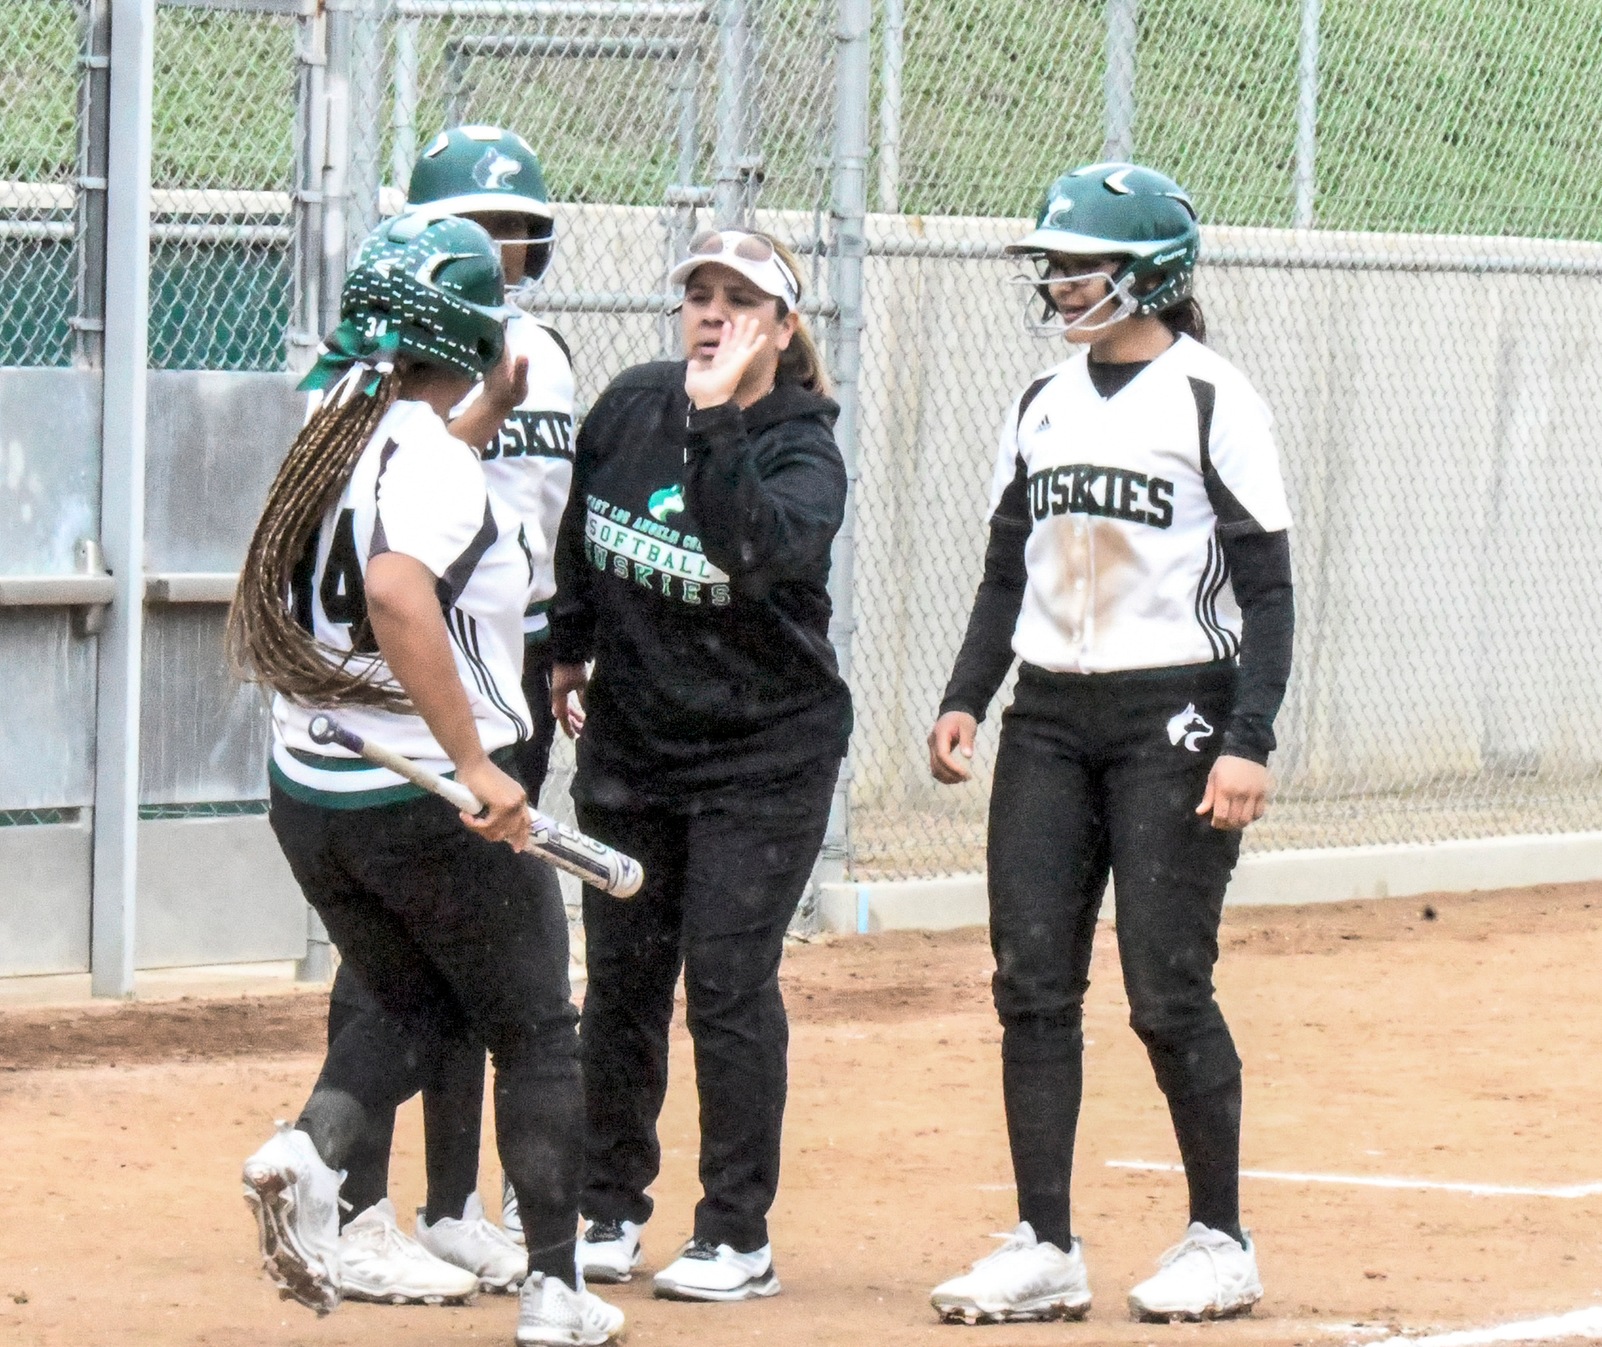 The Huskies softball team (6-8) lost a 2-1 pitching dual to No. 9 state-ranked Riverside City College (11-4) on February 26 at the Evans Sports Complex in Riverside. (Photo by DeeDee Jackson)